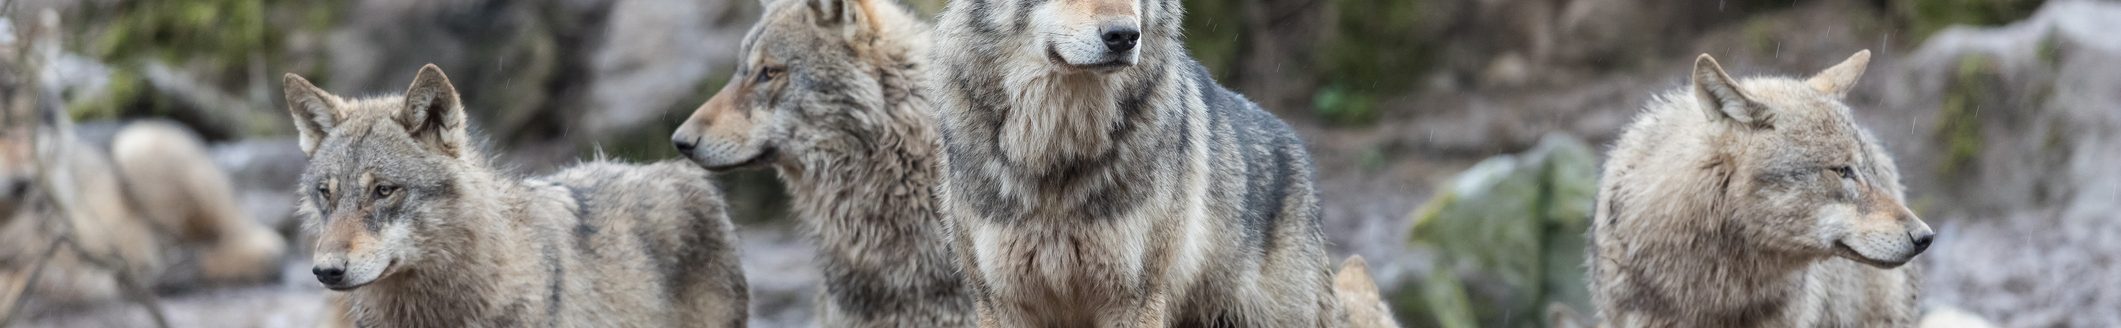 Grey wolf in the forest (Photo: iStock - AB Photography)